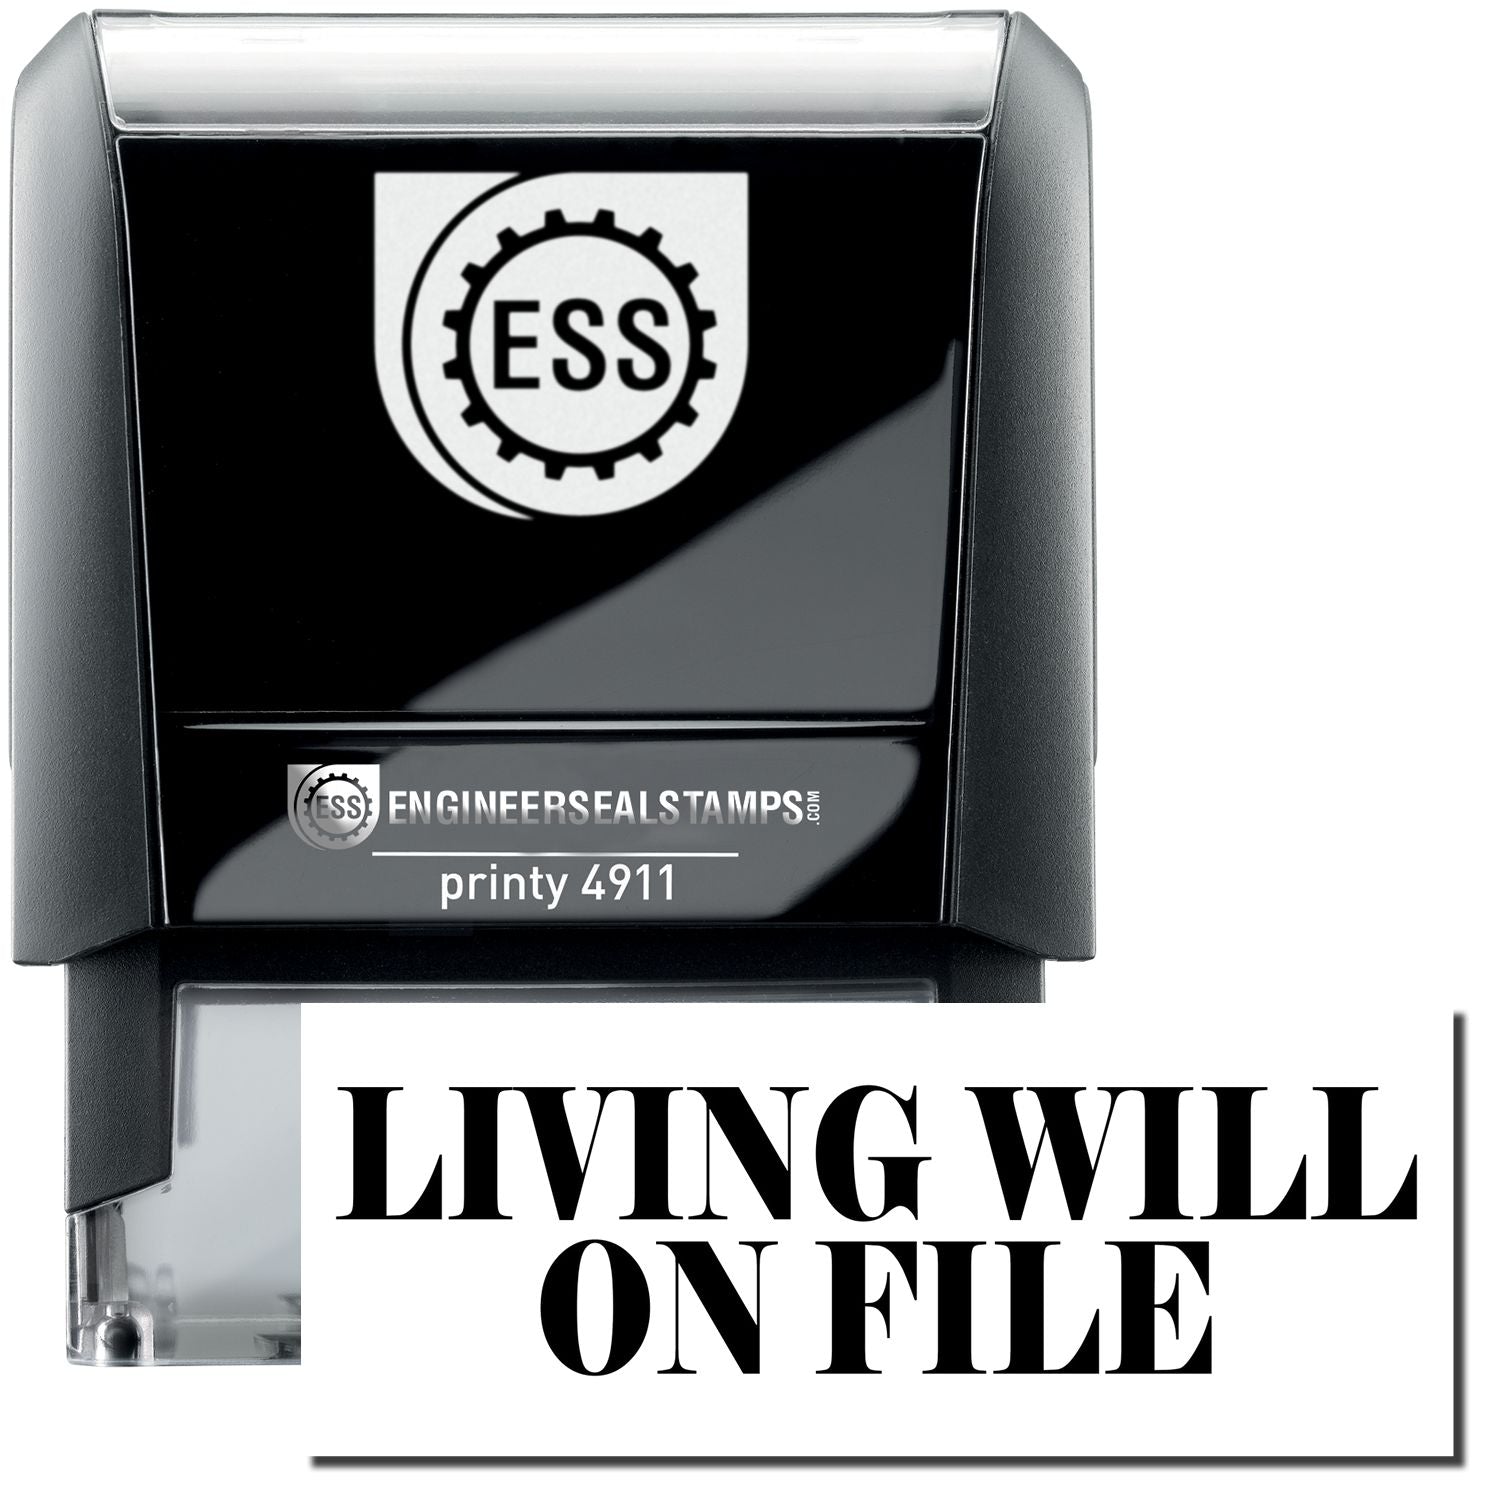 A self-inking stamp with a stamped image showing how the text "LIVING WILL ON FILE" is displayed after stamping.